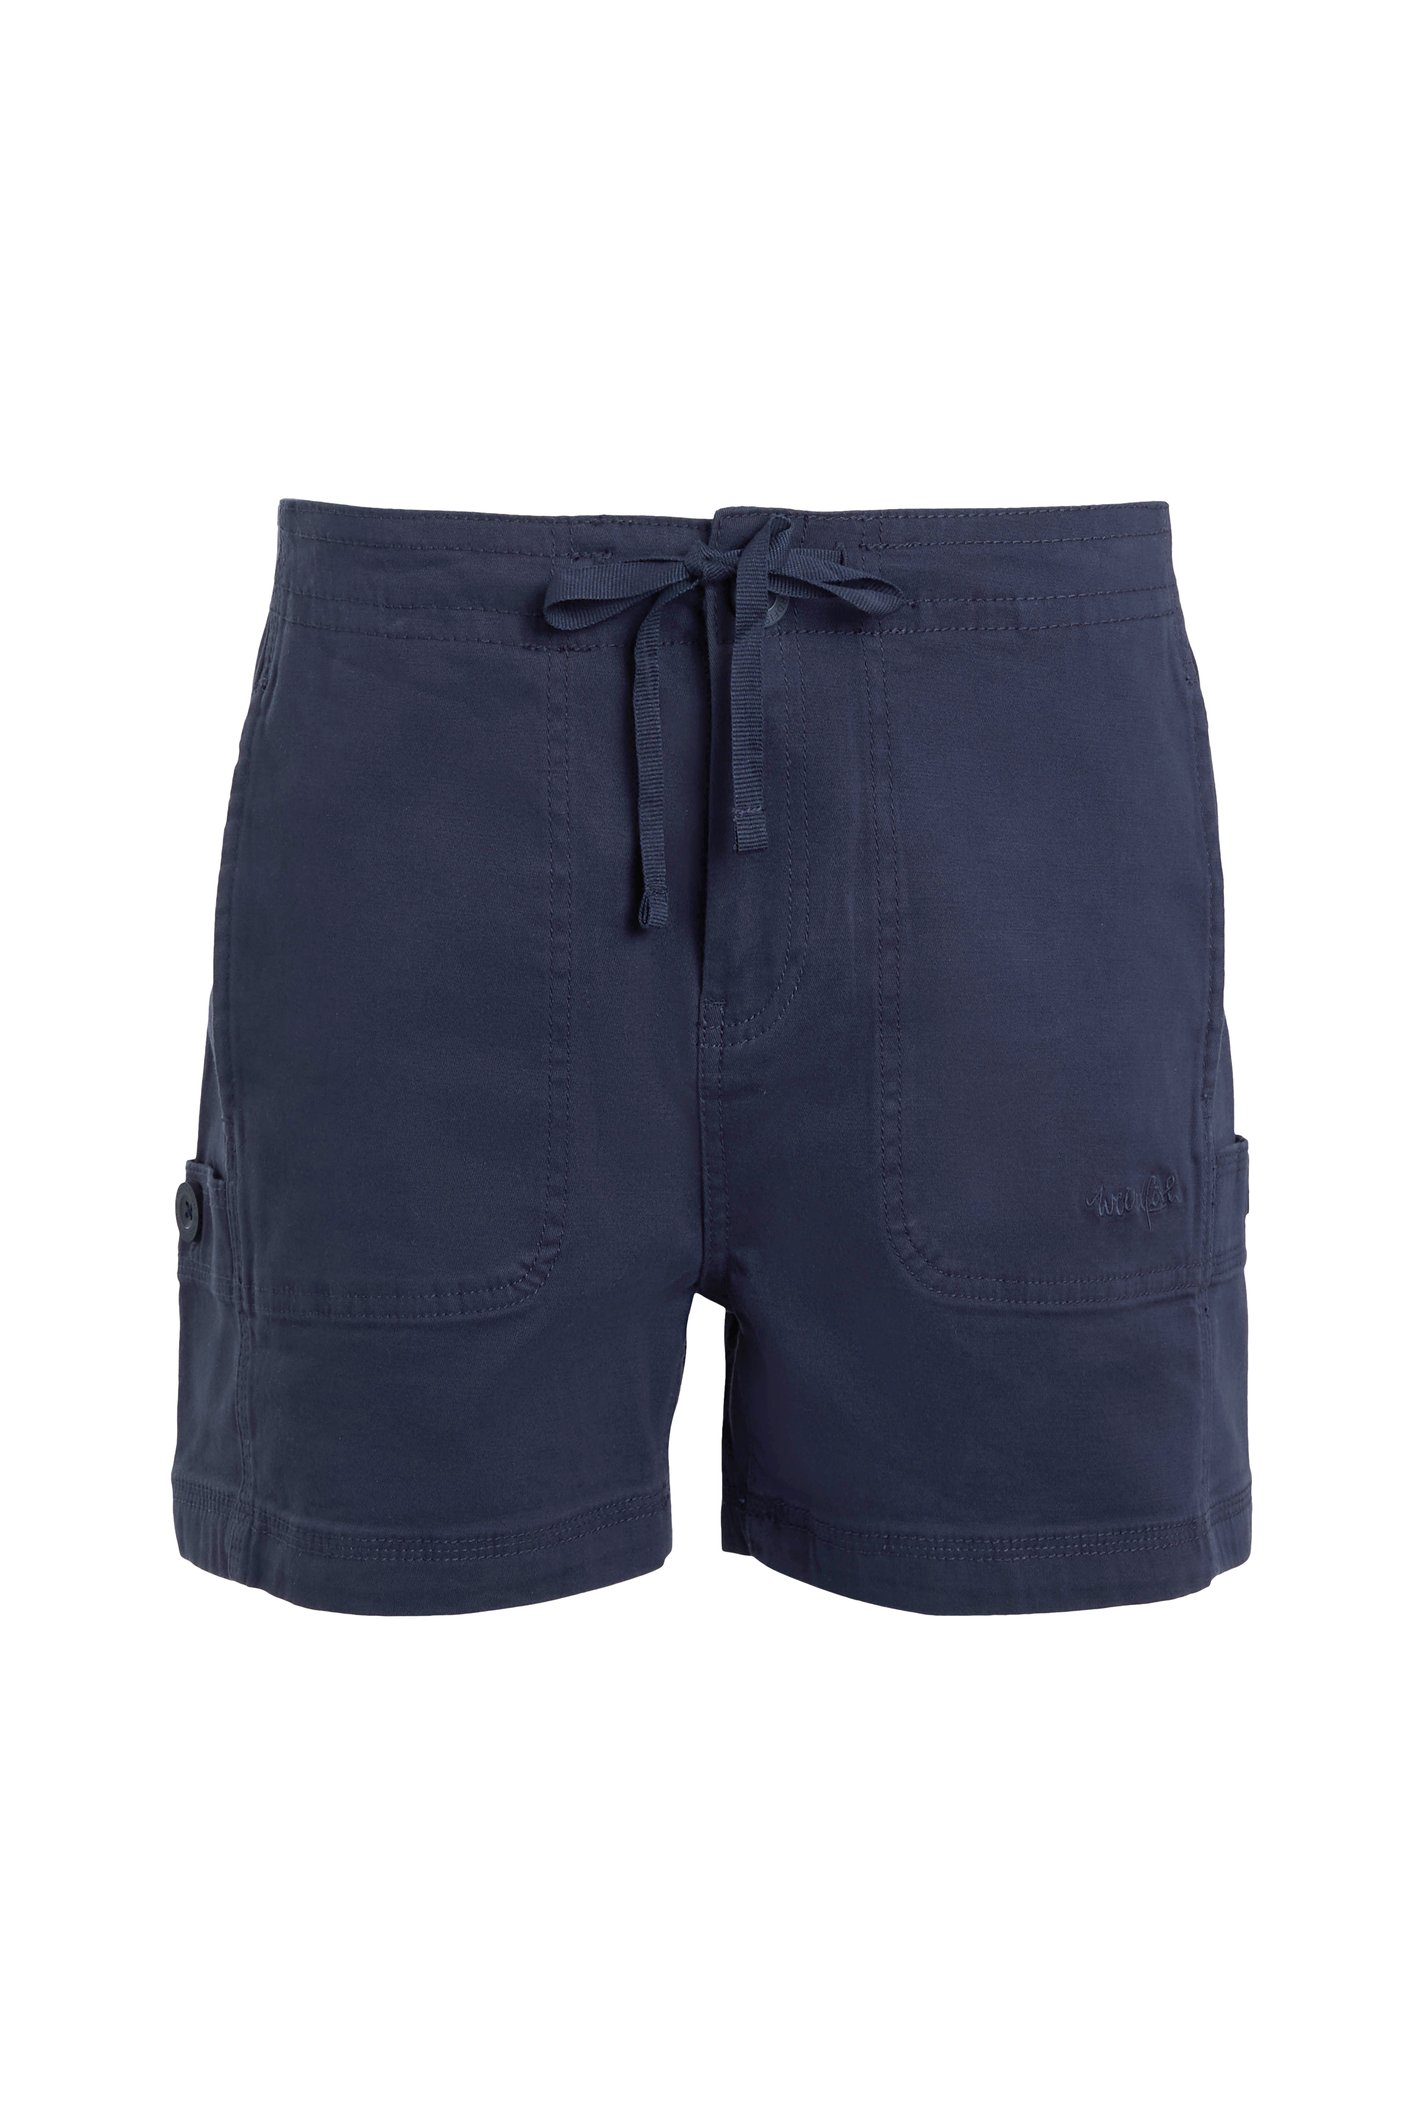 Weird Fish Willoughby Summer Shorts Navy Size 18